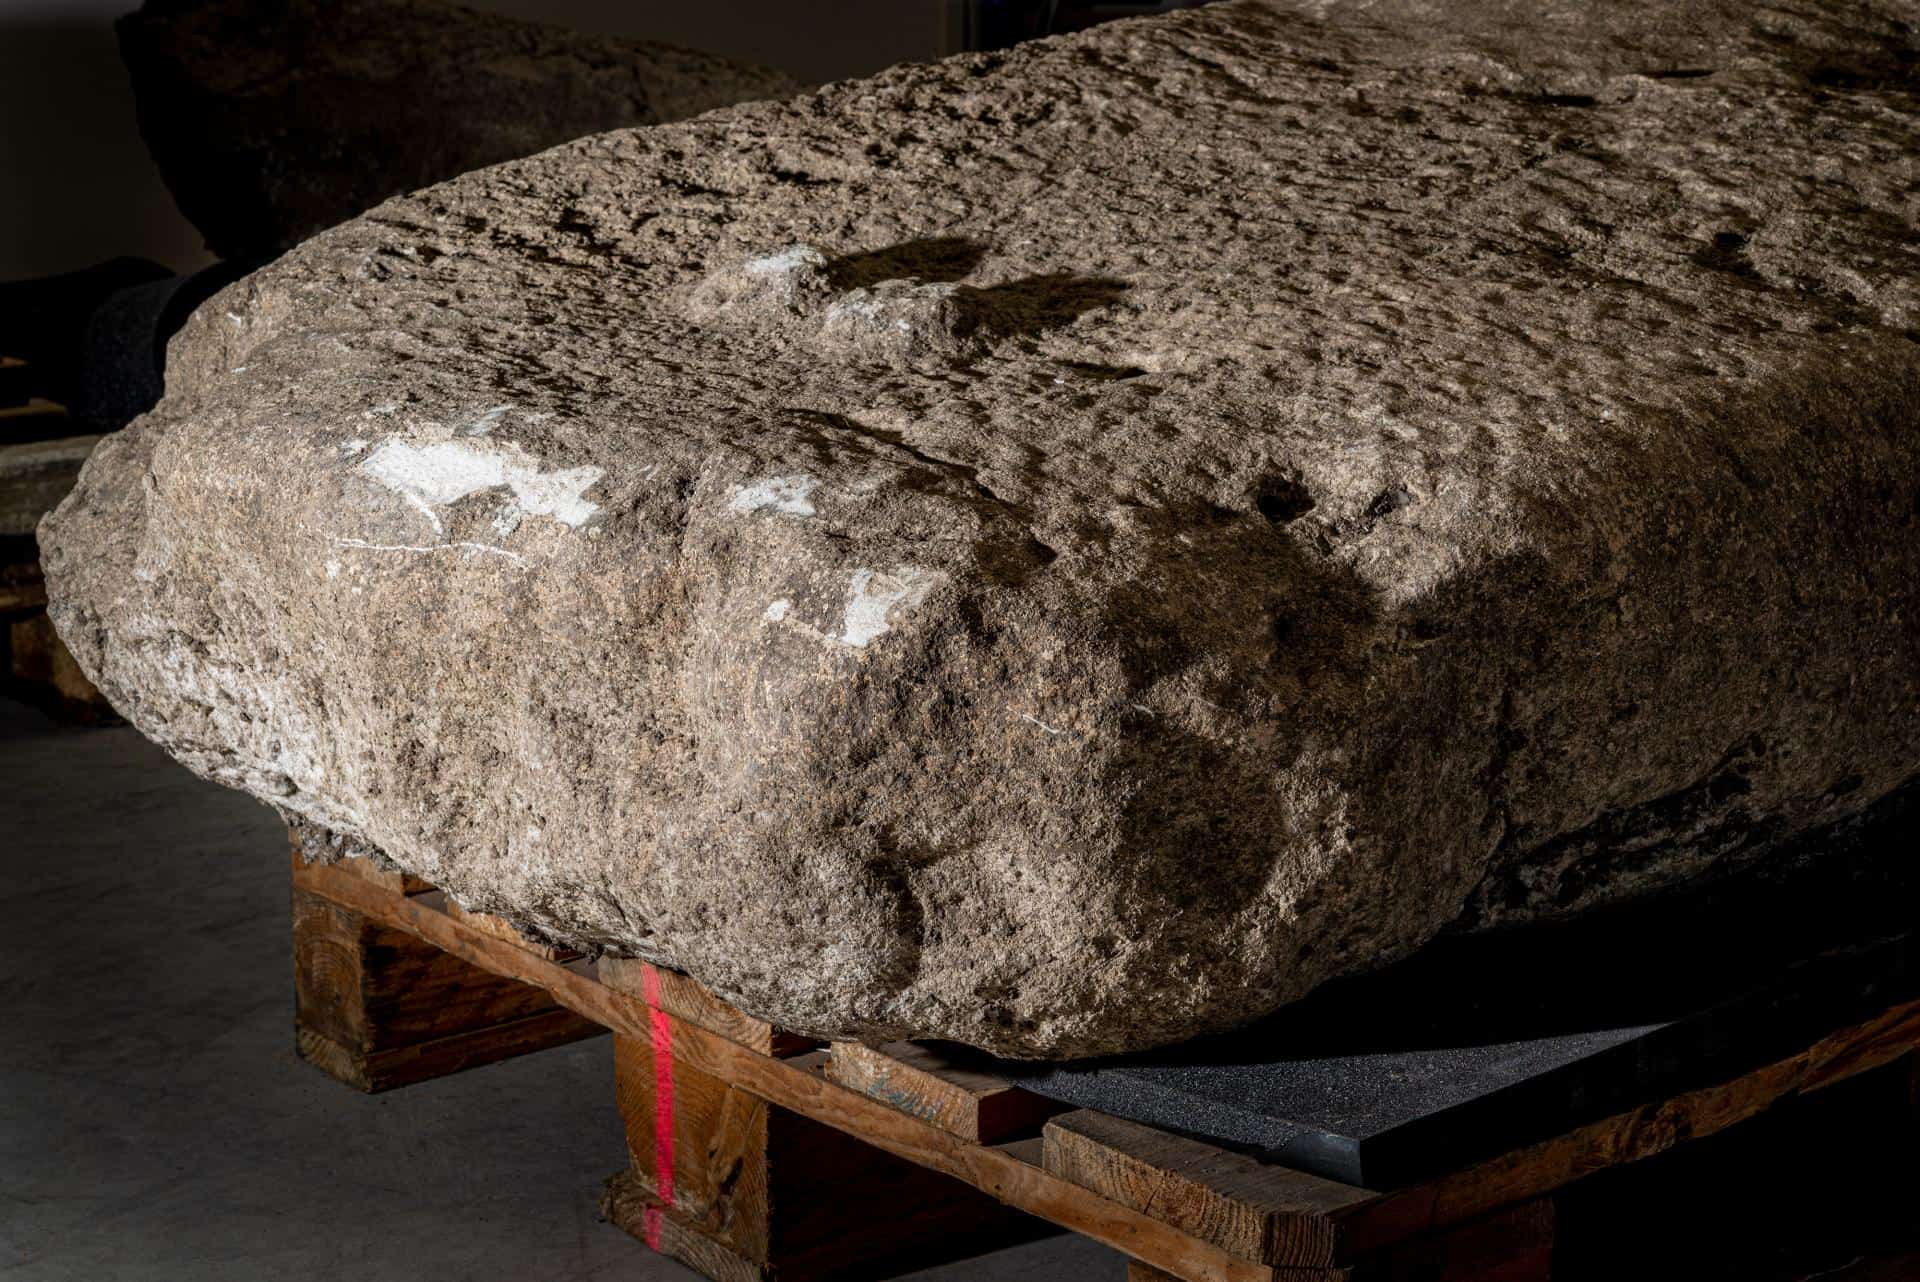 dsc - Prehistoric monoliths found in central France for the first time